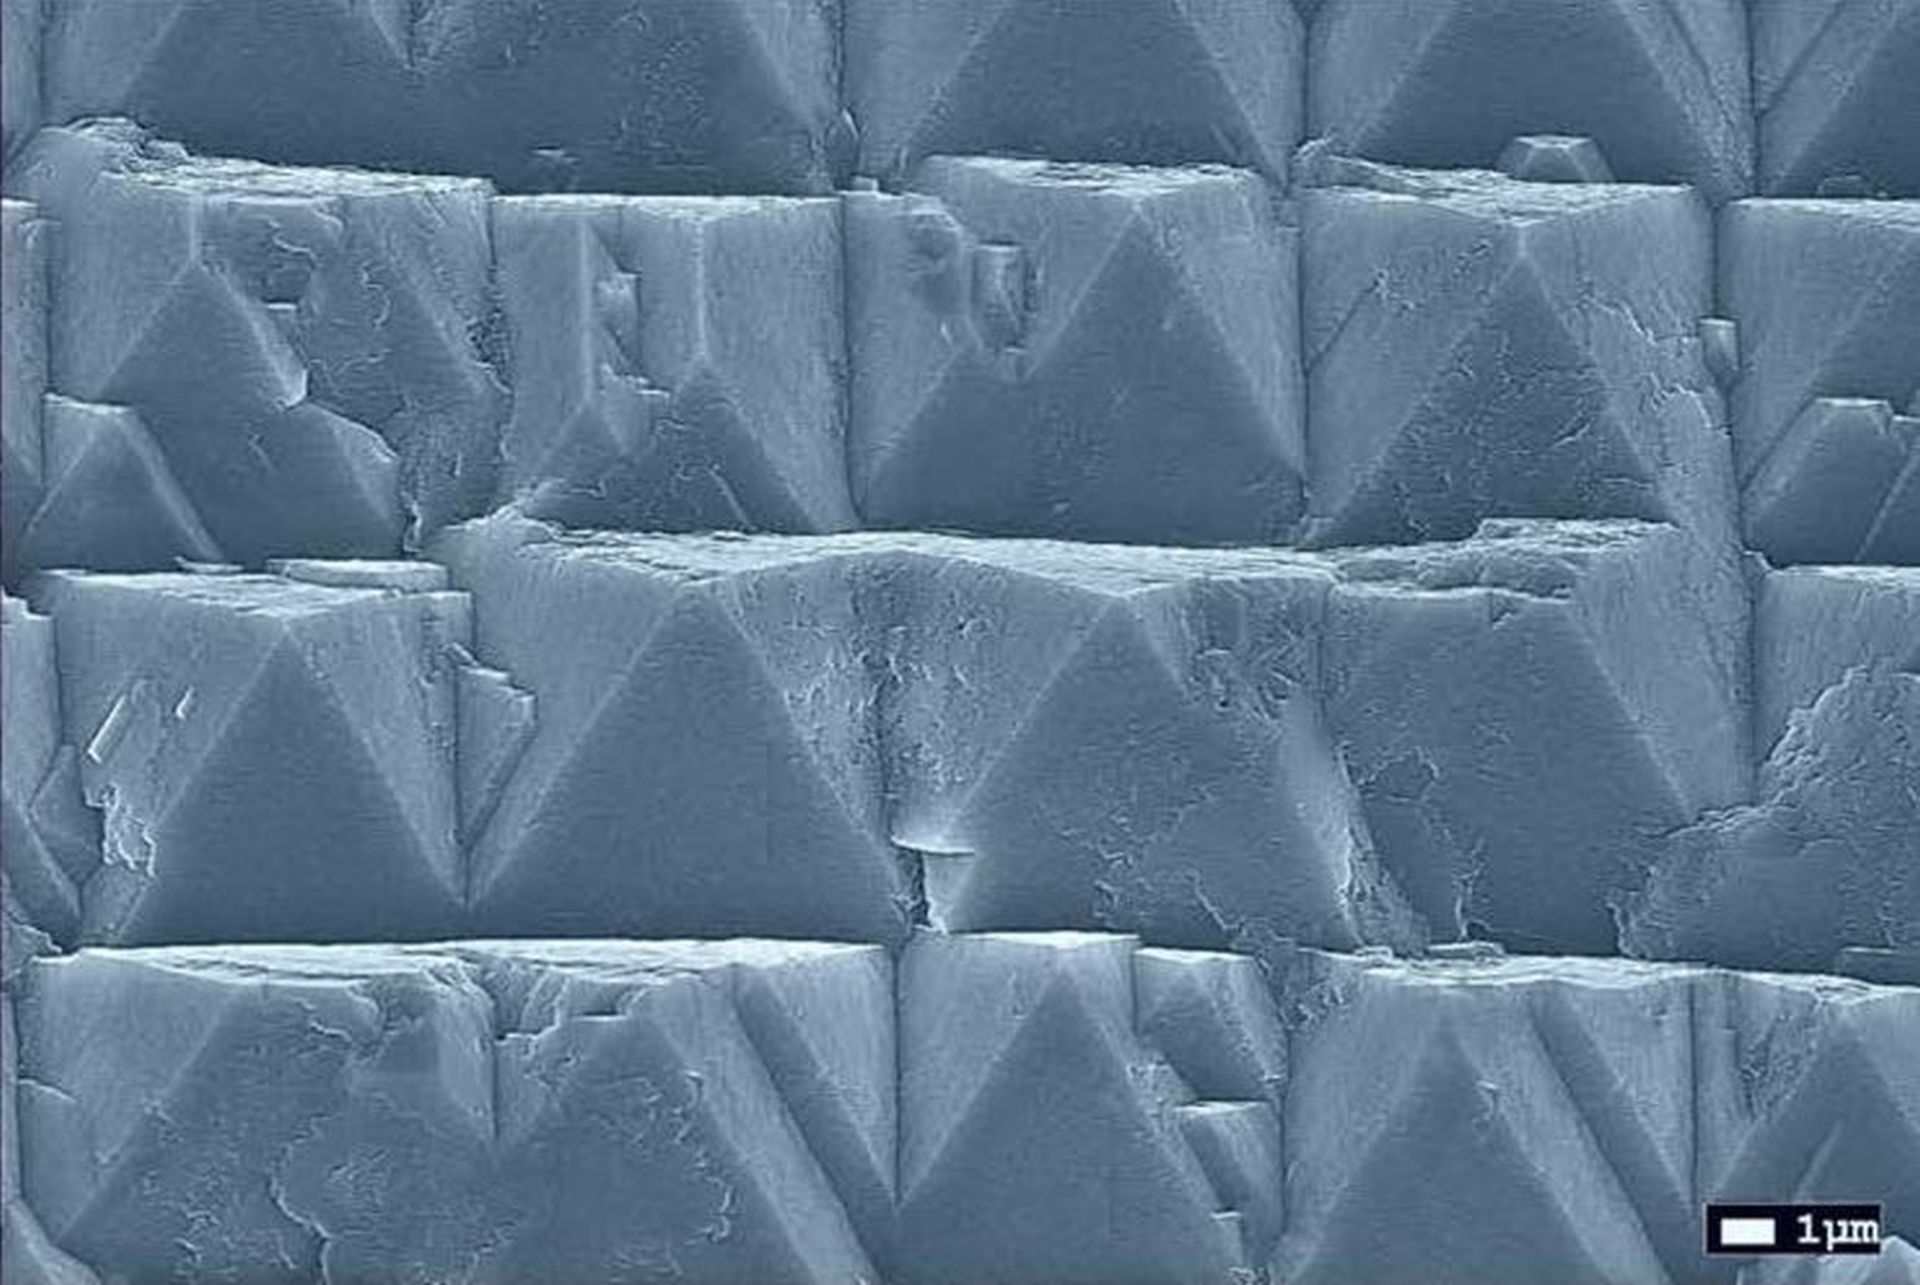 Electron micrograph of an early growth phase of diamond on a wafer